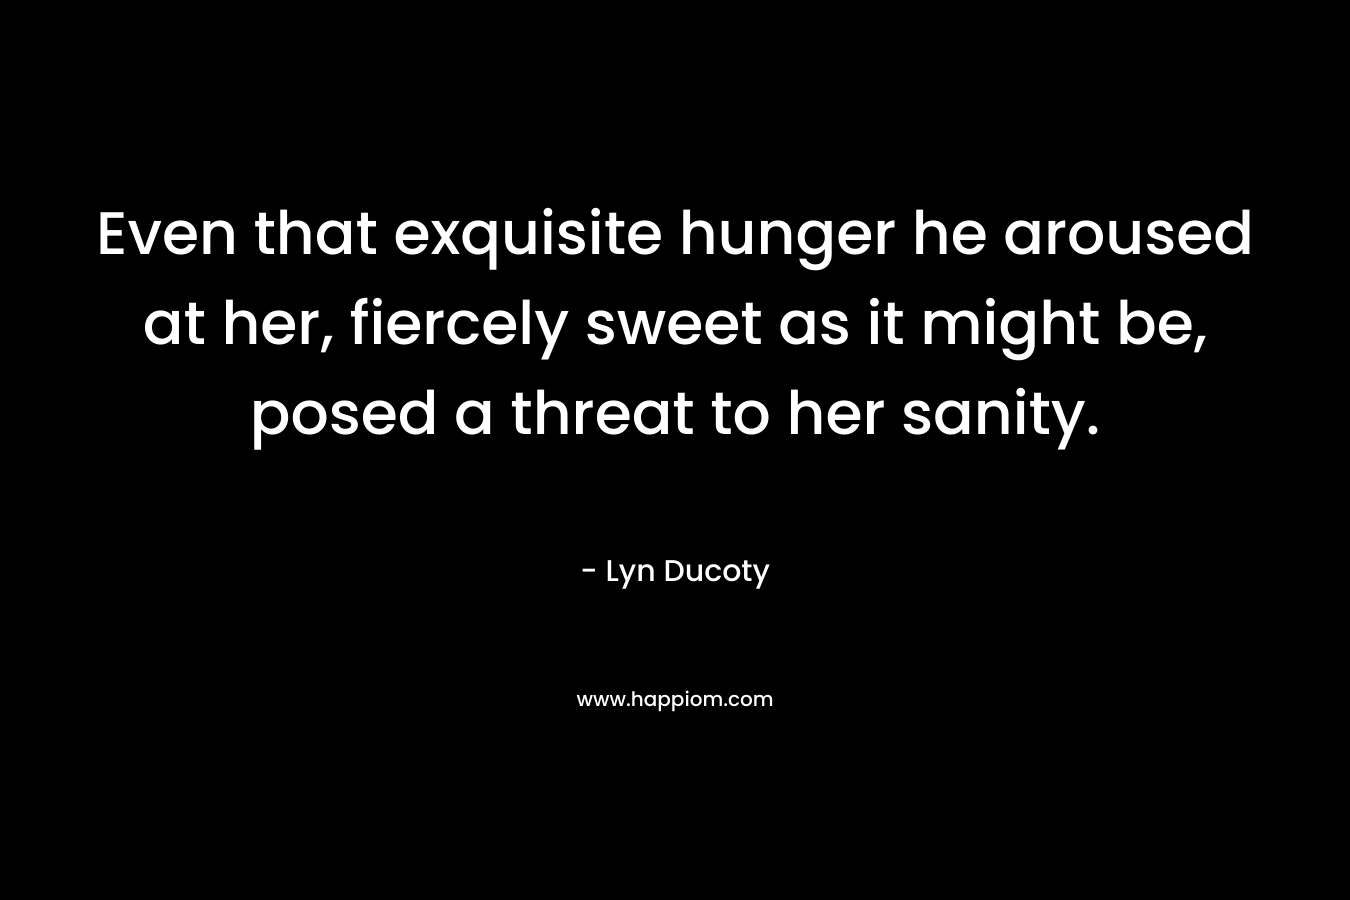 Even that exquisite hunger he aroused at her, fiercely sweet as it might be, posed a threat to her sanity.